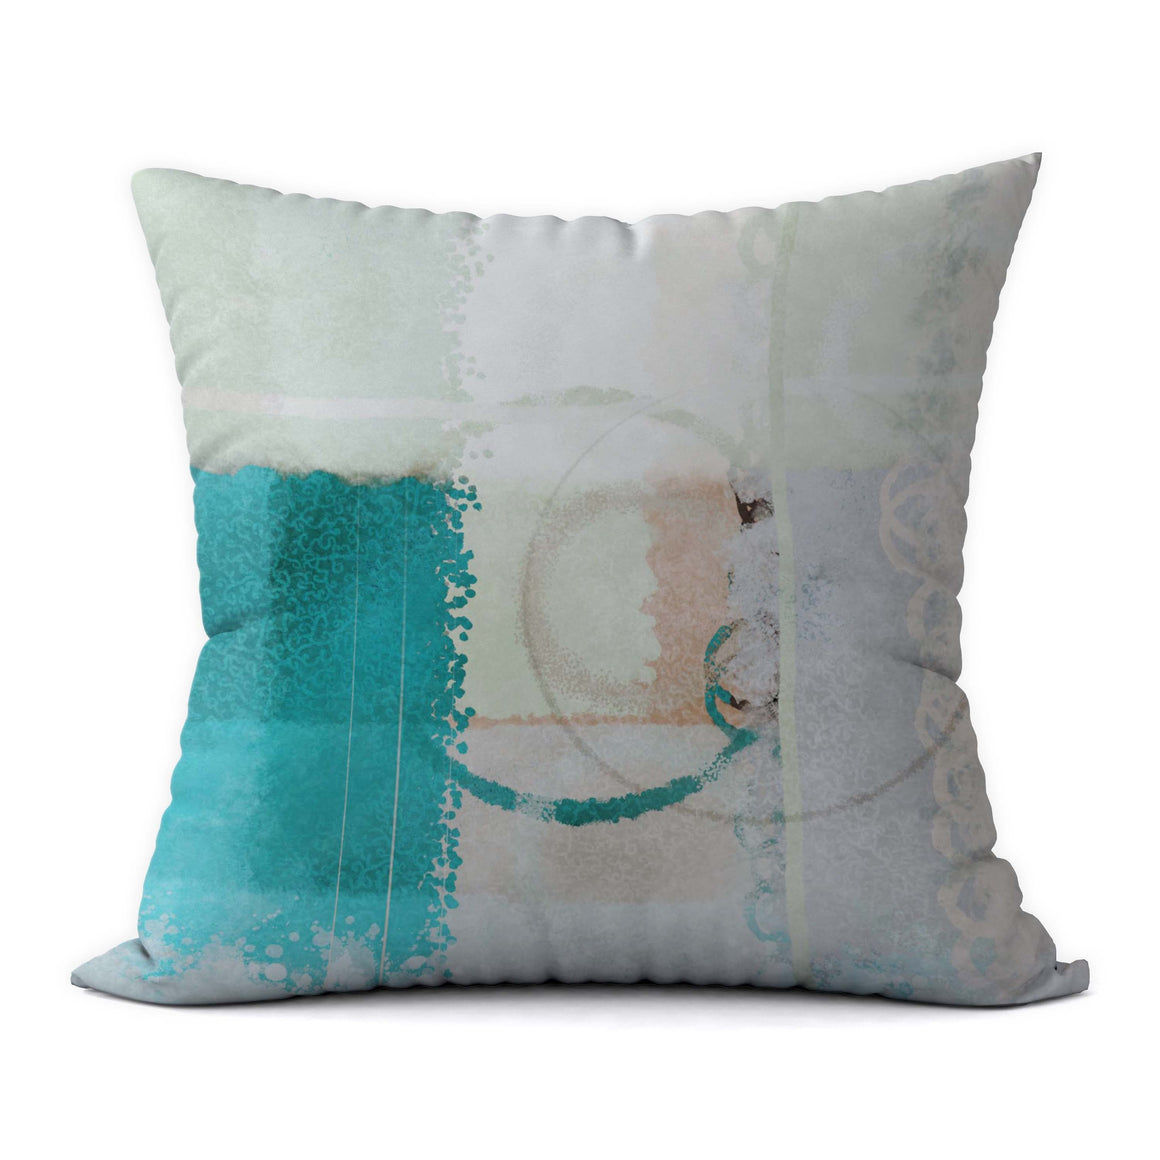 Lakeside Forest #993 Decorative Throw Pillow